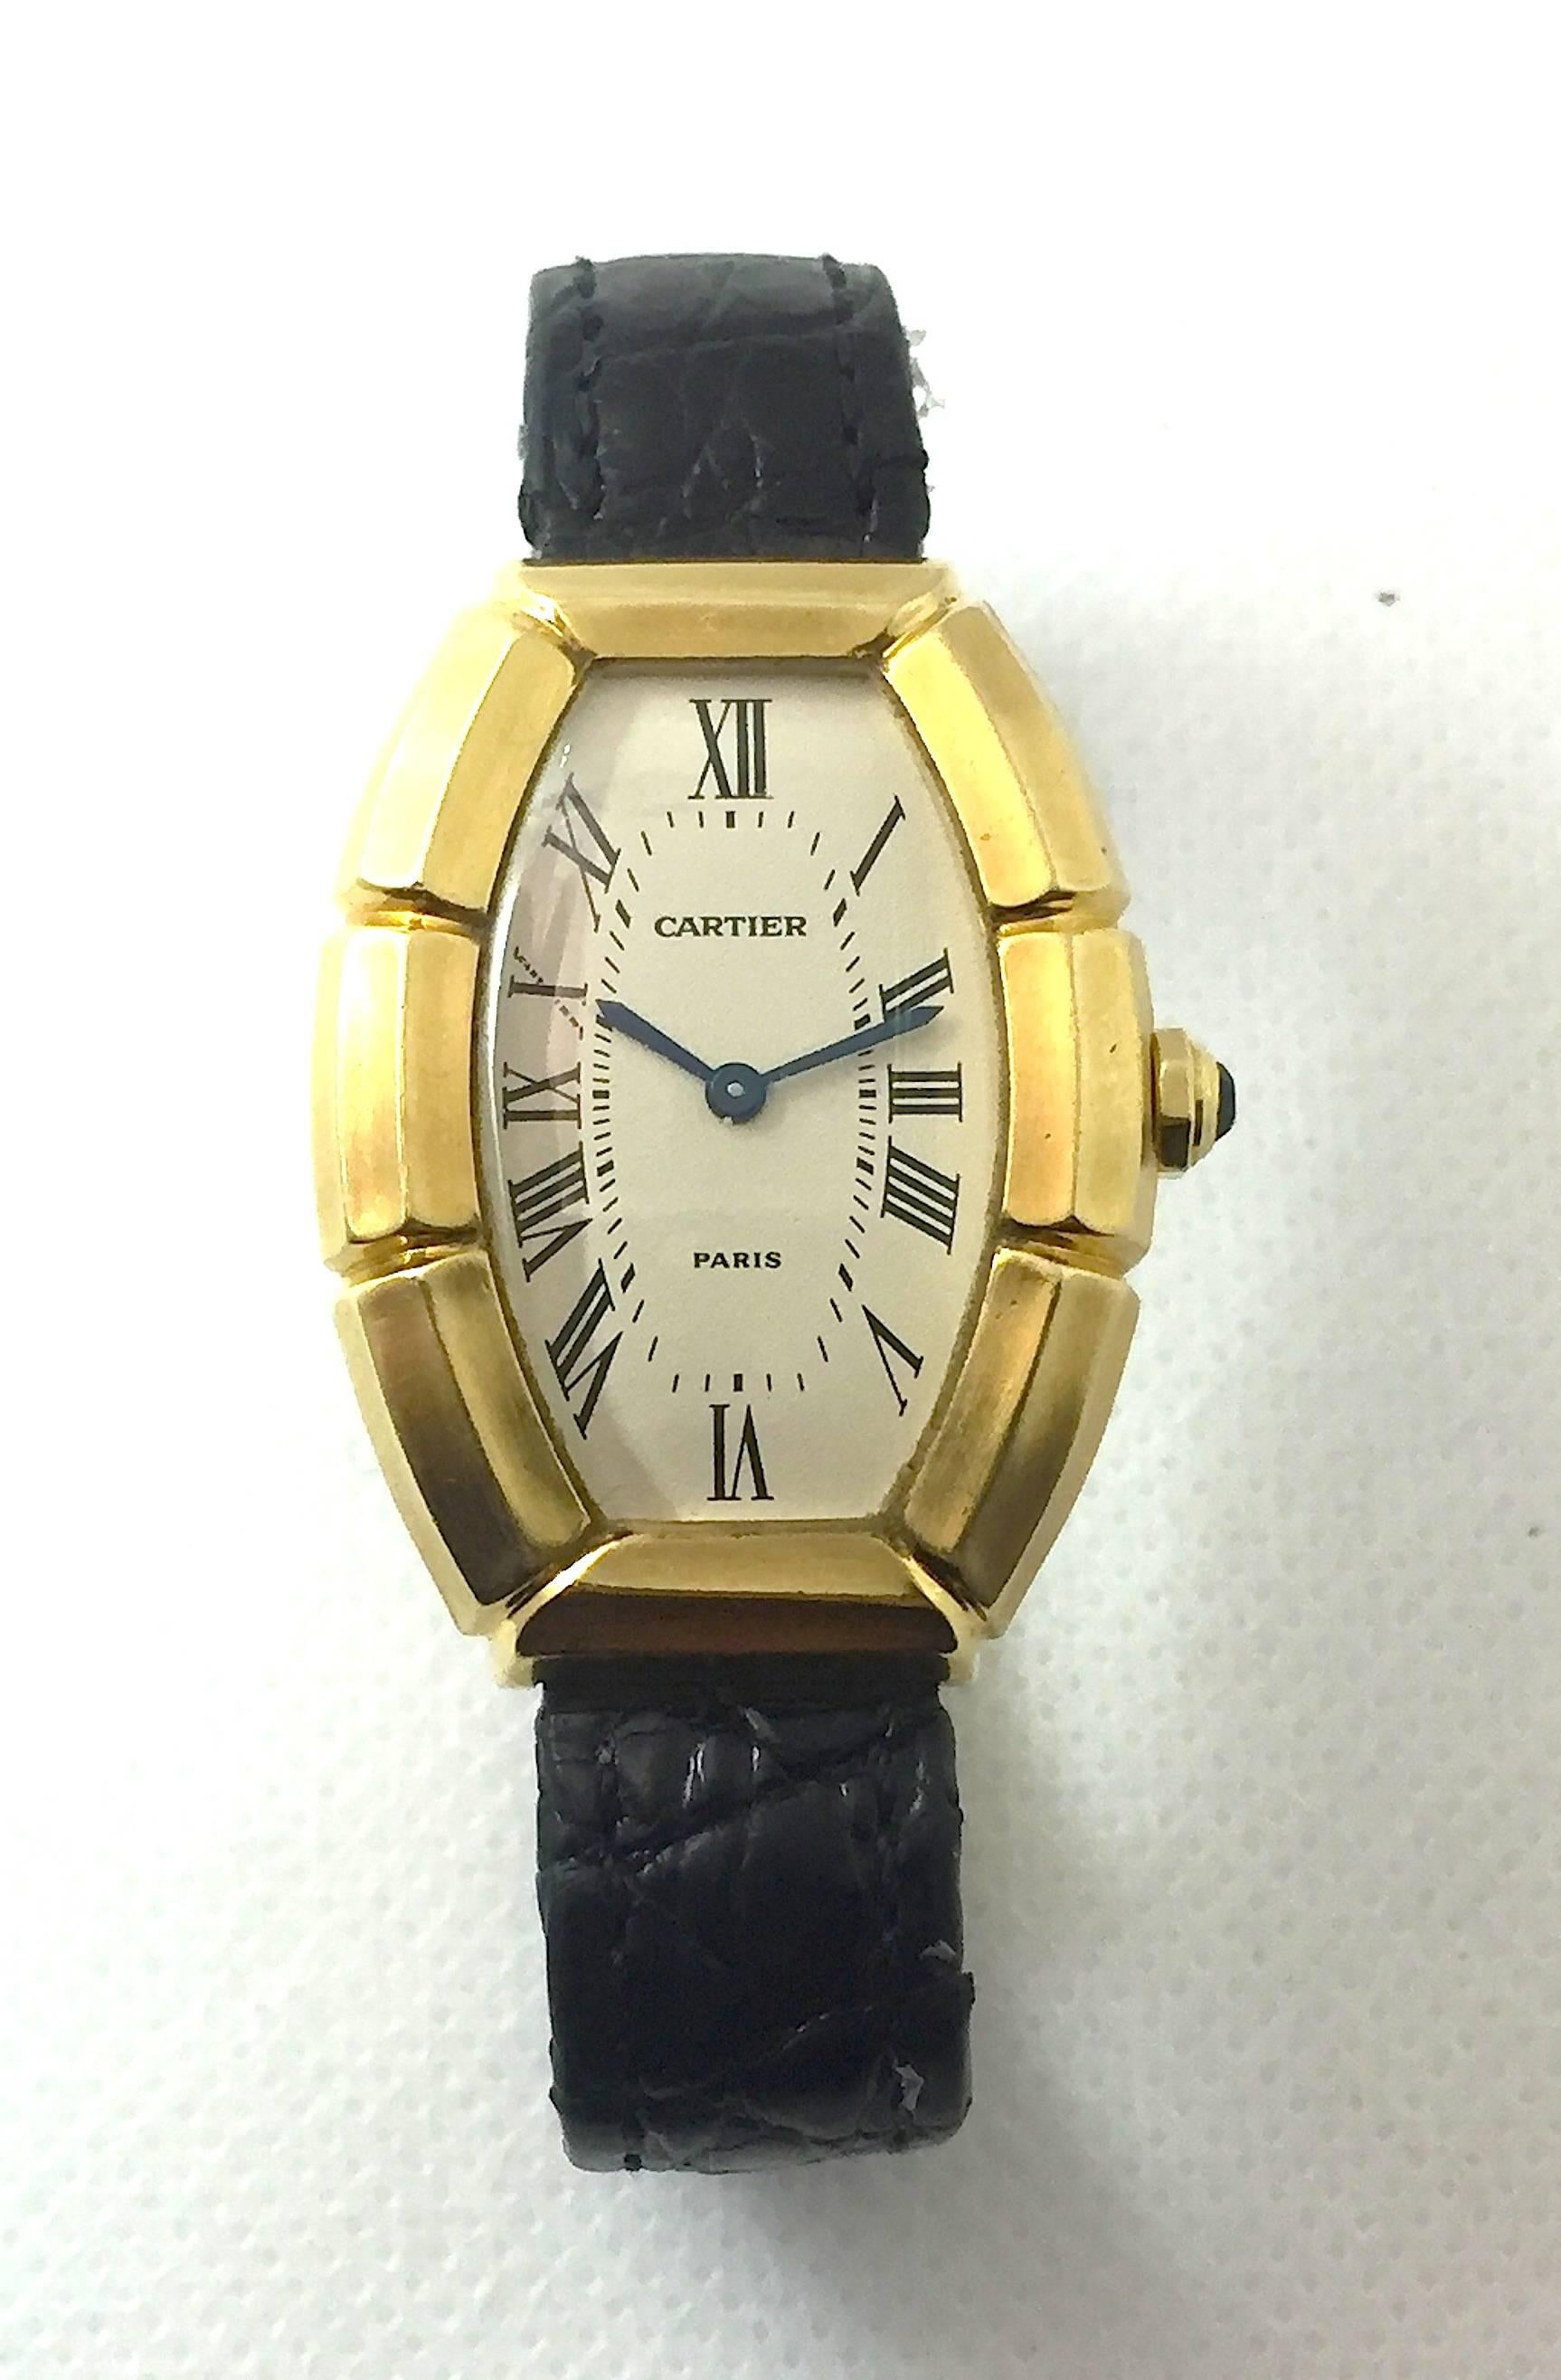 Cartier Paris Solid 18K Yellow Gold Watch 
Carved/Scalloped Tonneau Shape
Automatic Movement
Beautiful Original Cartier Paris Dial with Roman Numeral Markers
Classic Blue Cartier Hands
Signed and Engraved Case-Back
Cartier Blue Cabochon Crown
Signed